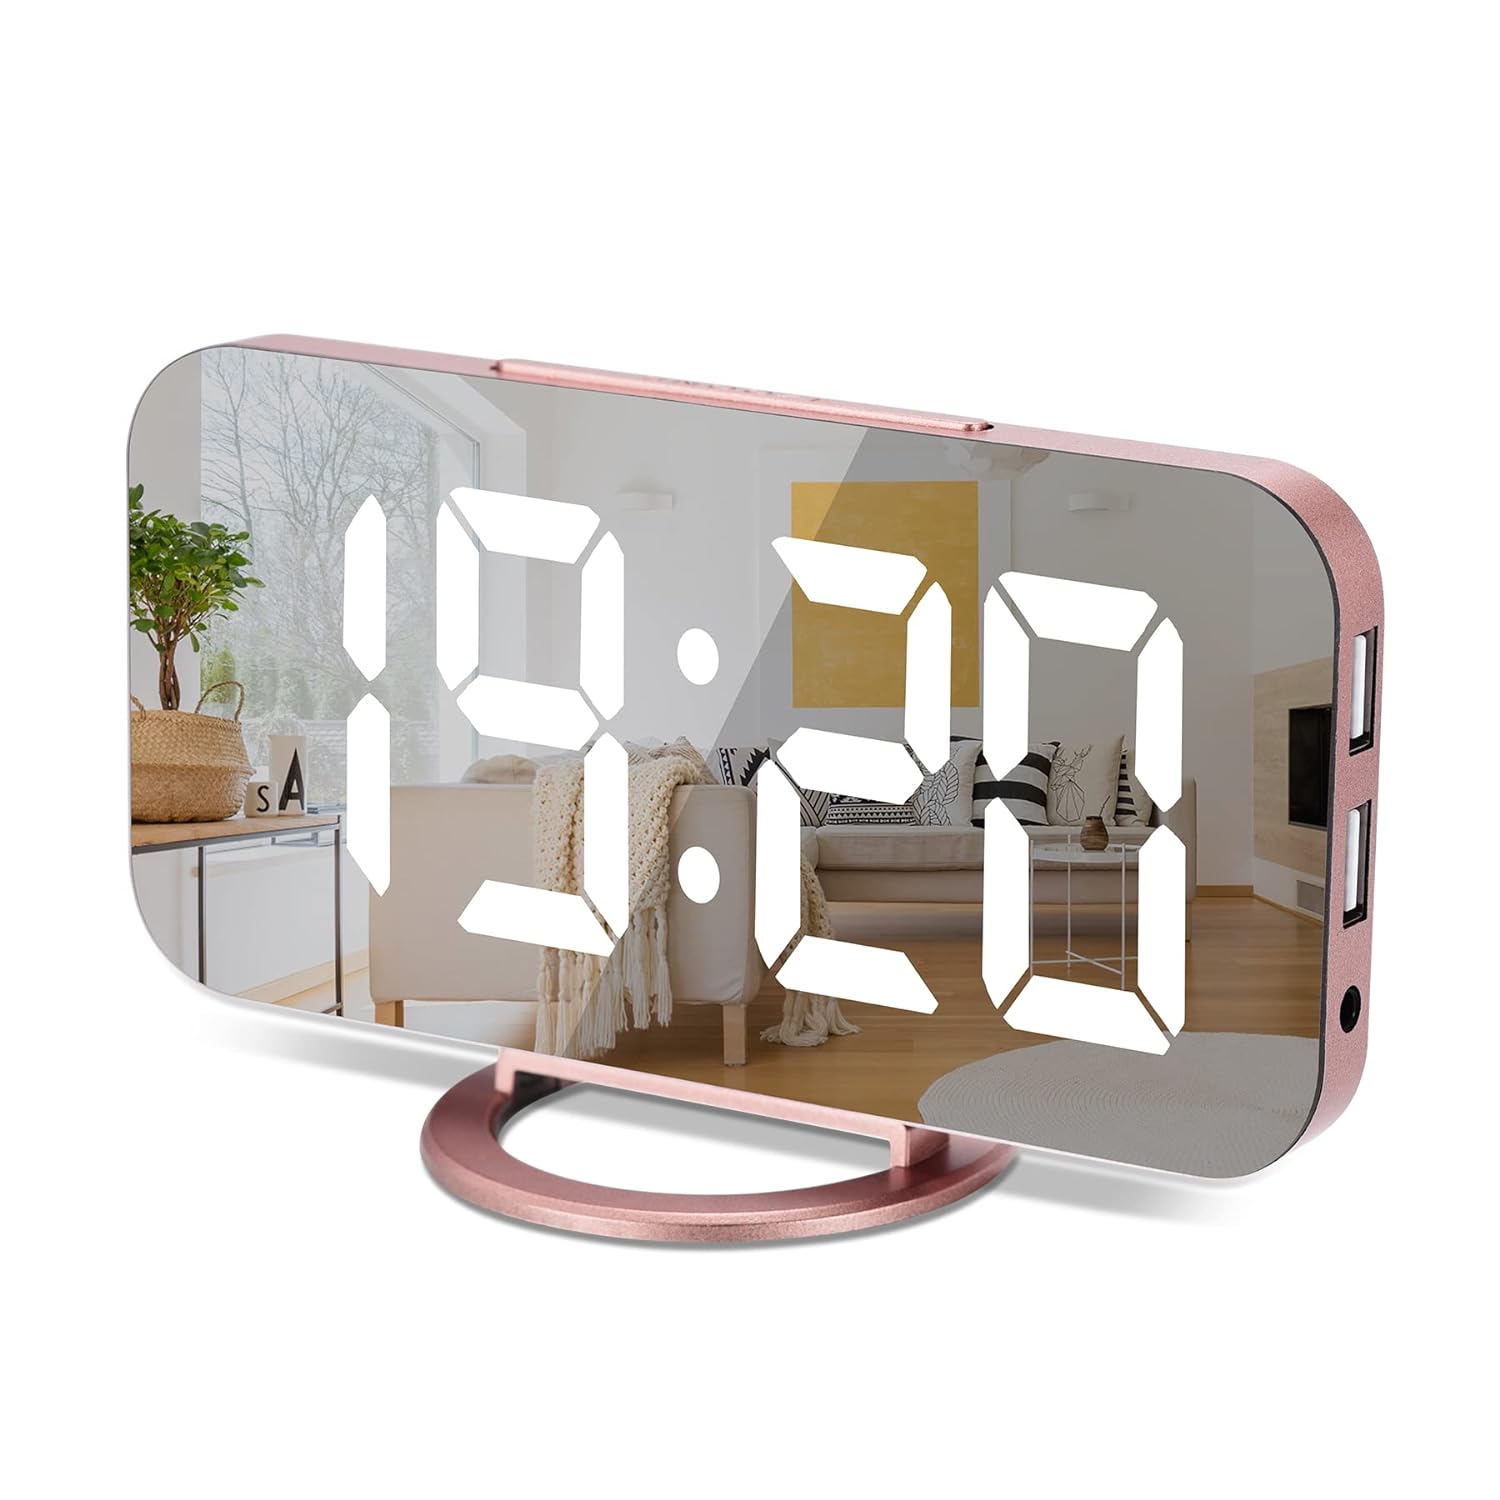 Digital Clock Large Display, LED Electric Alarm Clocks Mirror Surface for Makeup with Diming Mode, 3 Levels Brightness, Dual USB Ports Modern Decoration for Home Bedroom Decor-Rose Gold